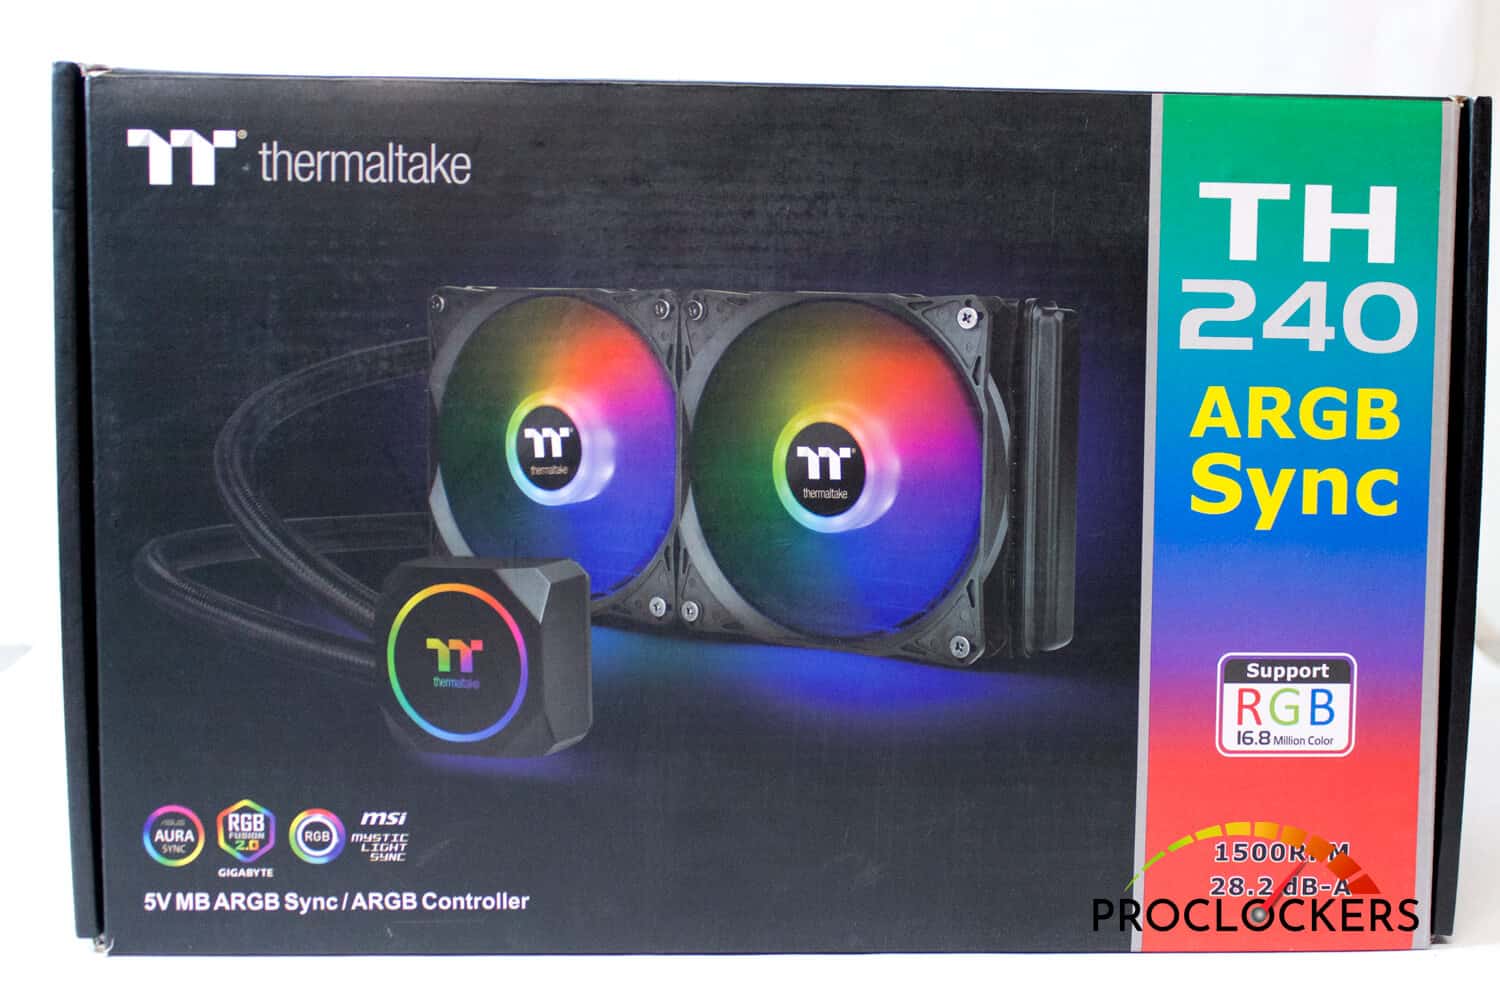 Thermaltake TH240 AIO Cooler